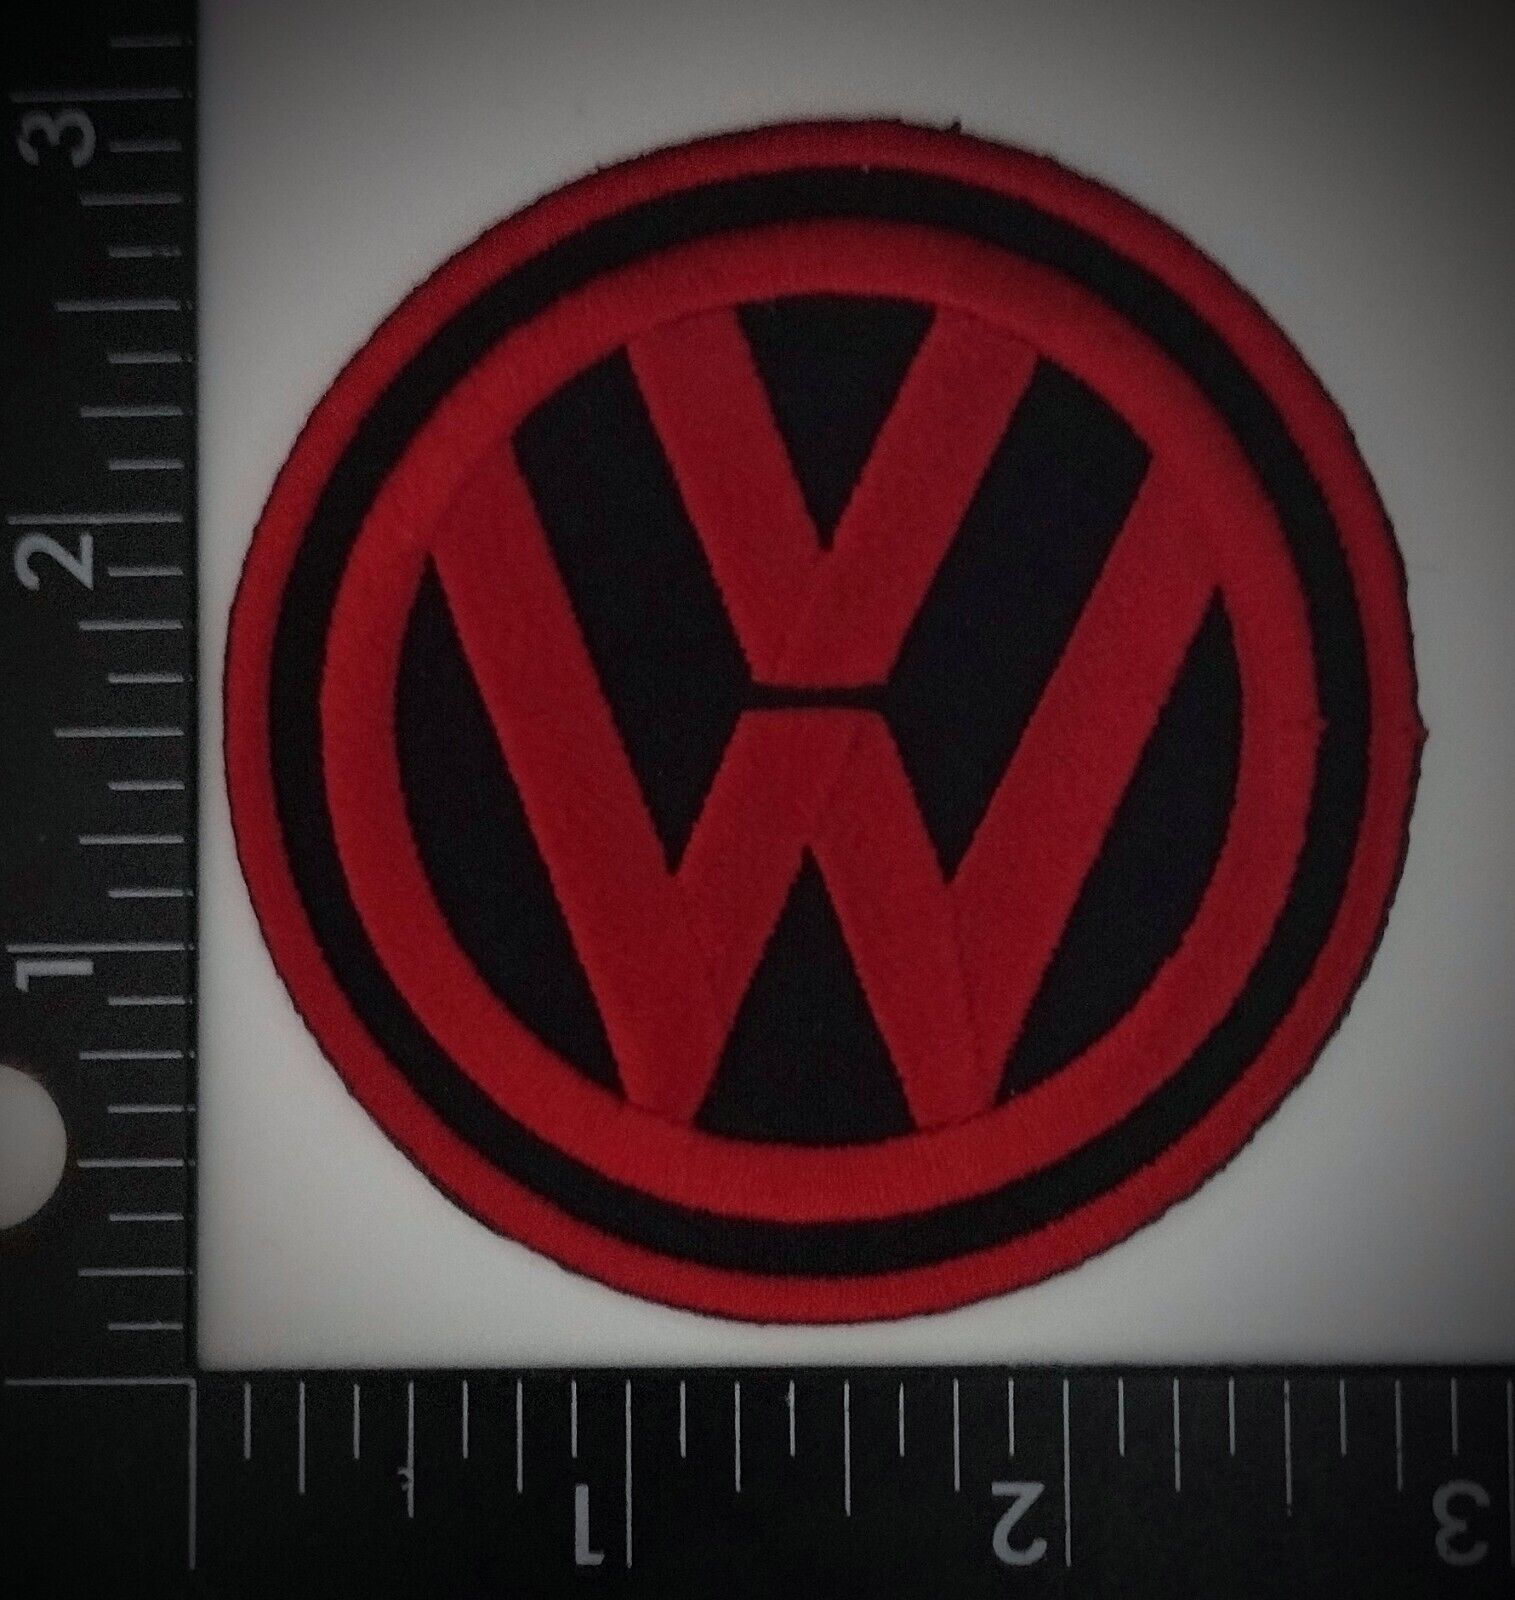 VOLKSWAGEN VW High Quality PATCHES Iron / Sew RED and Black Fast Shipping w/TRK#